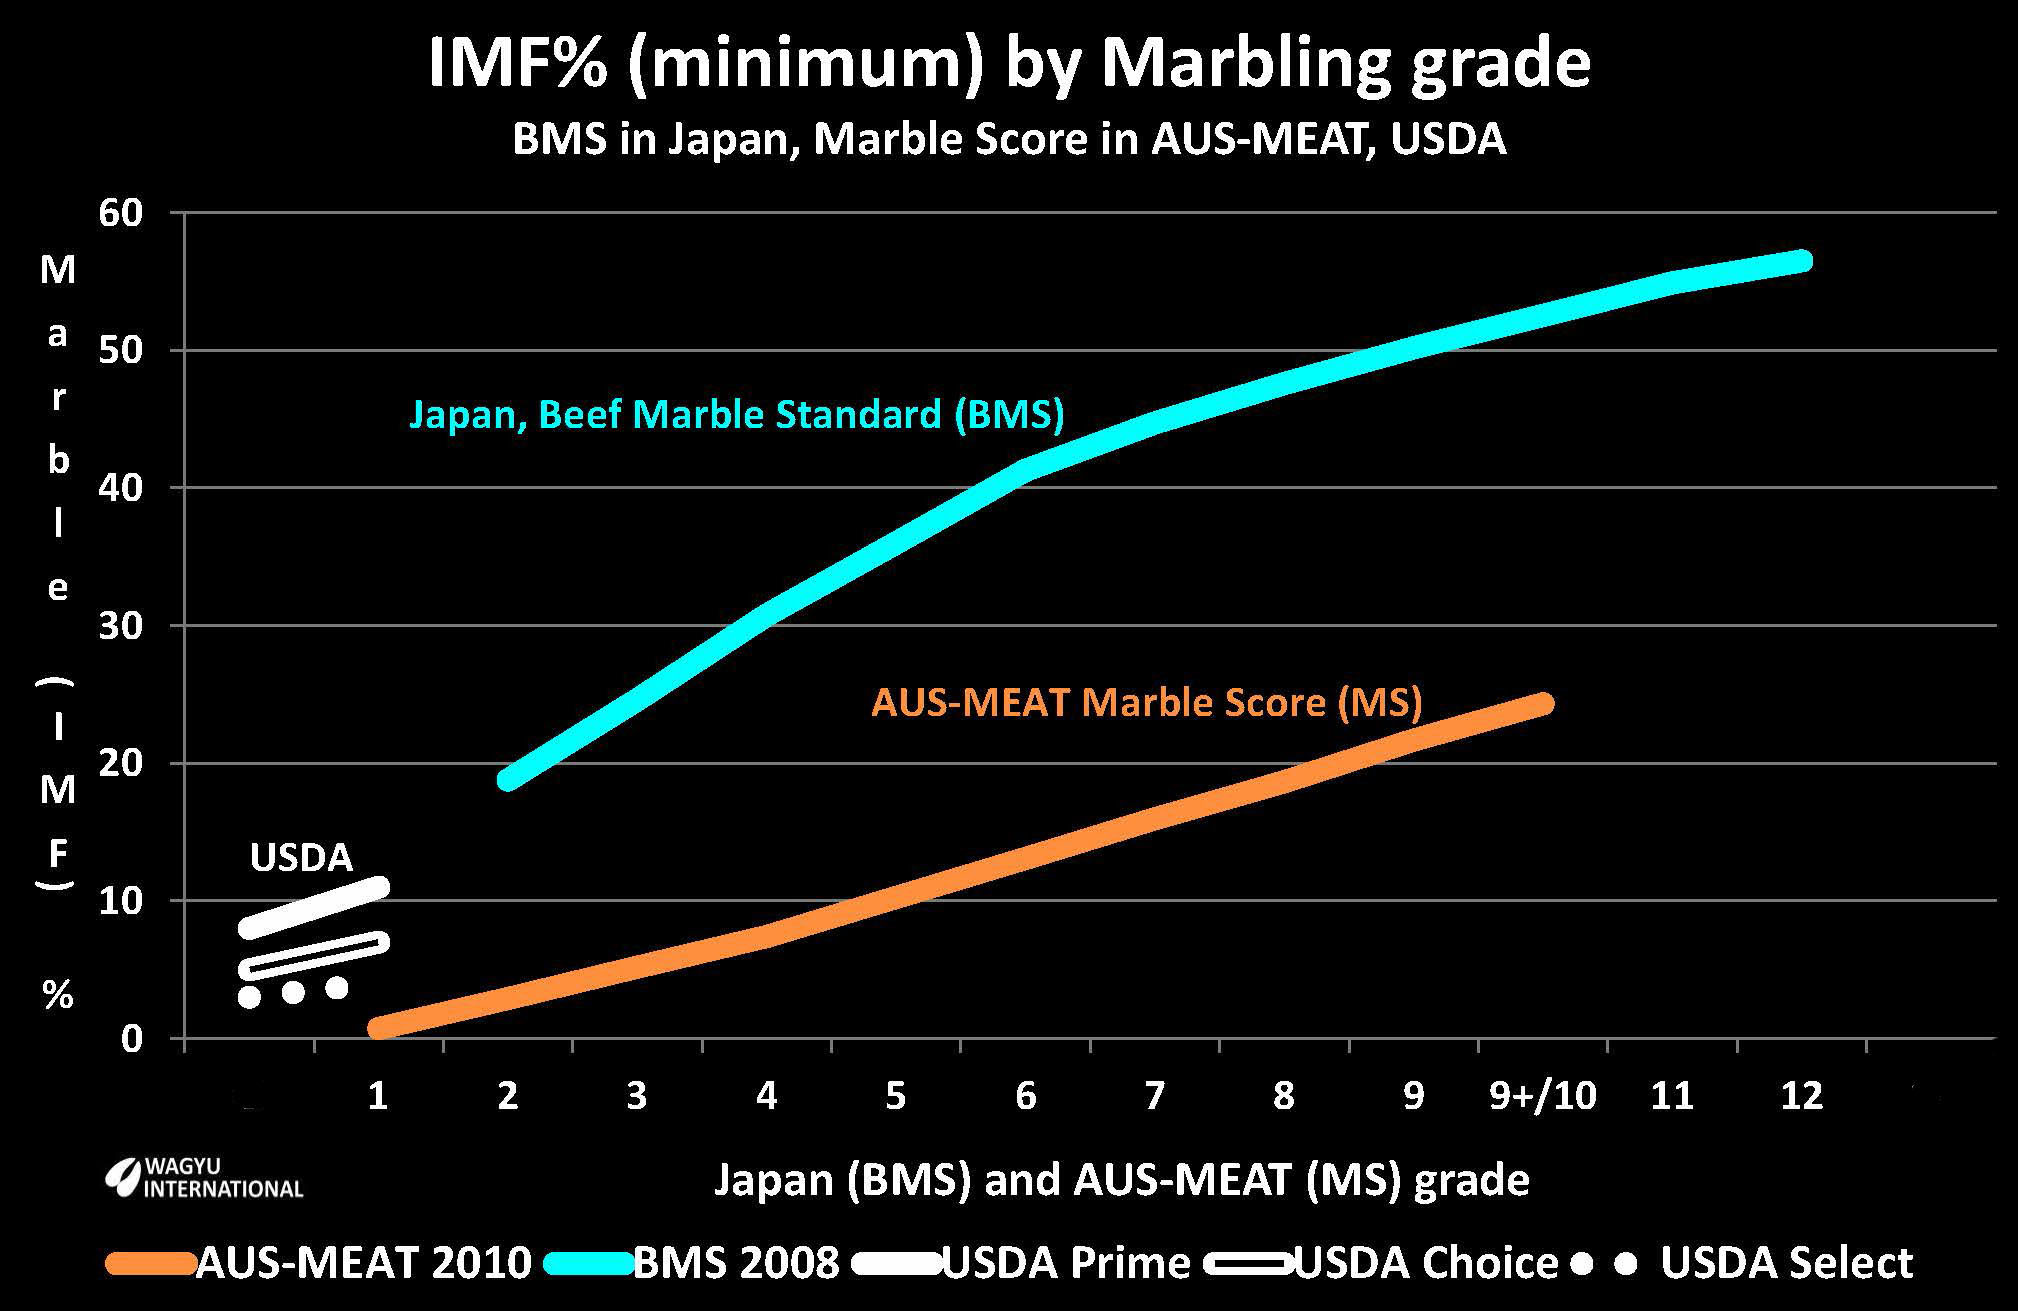 Chart illustrating minimum IMF% for each marble grade for BMS in Japan, AUS-MEAT Marble Score in Australia and marbling grades by USDA in USA